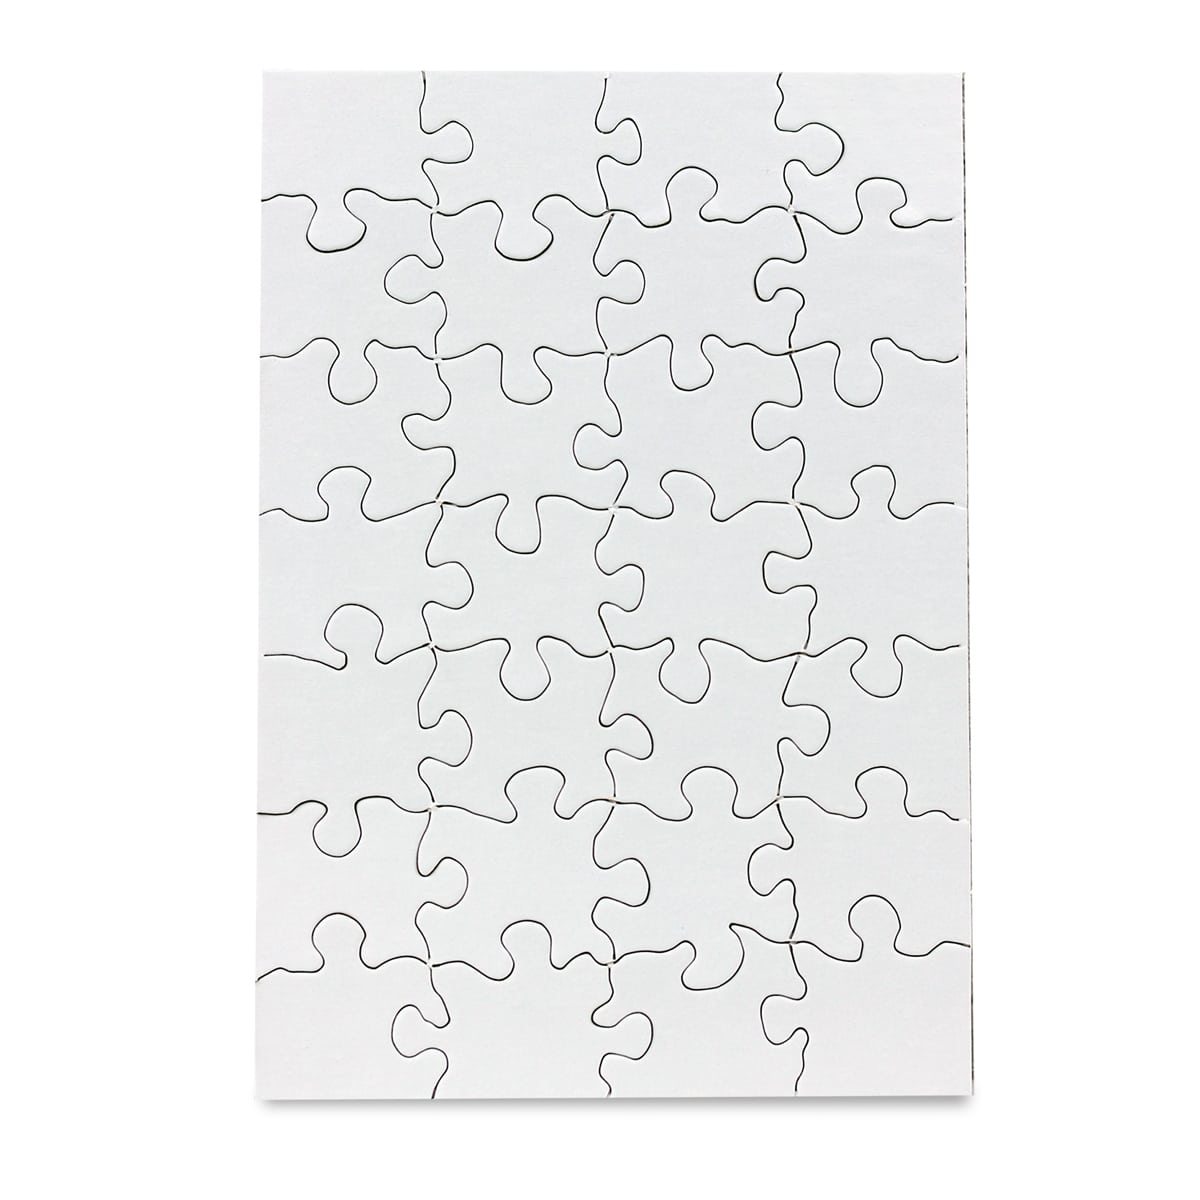  Hygloss Products - Blank Puzzles for Decorating, Jigsaw  Activity, Use As Party Favors, DIY Invites and More - White, Sturdy – 8.5 x  11 Inches, 63 Pieces, 12 Puzzles